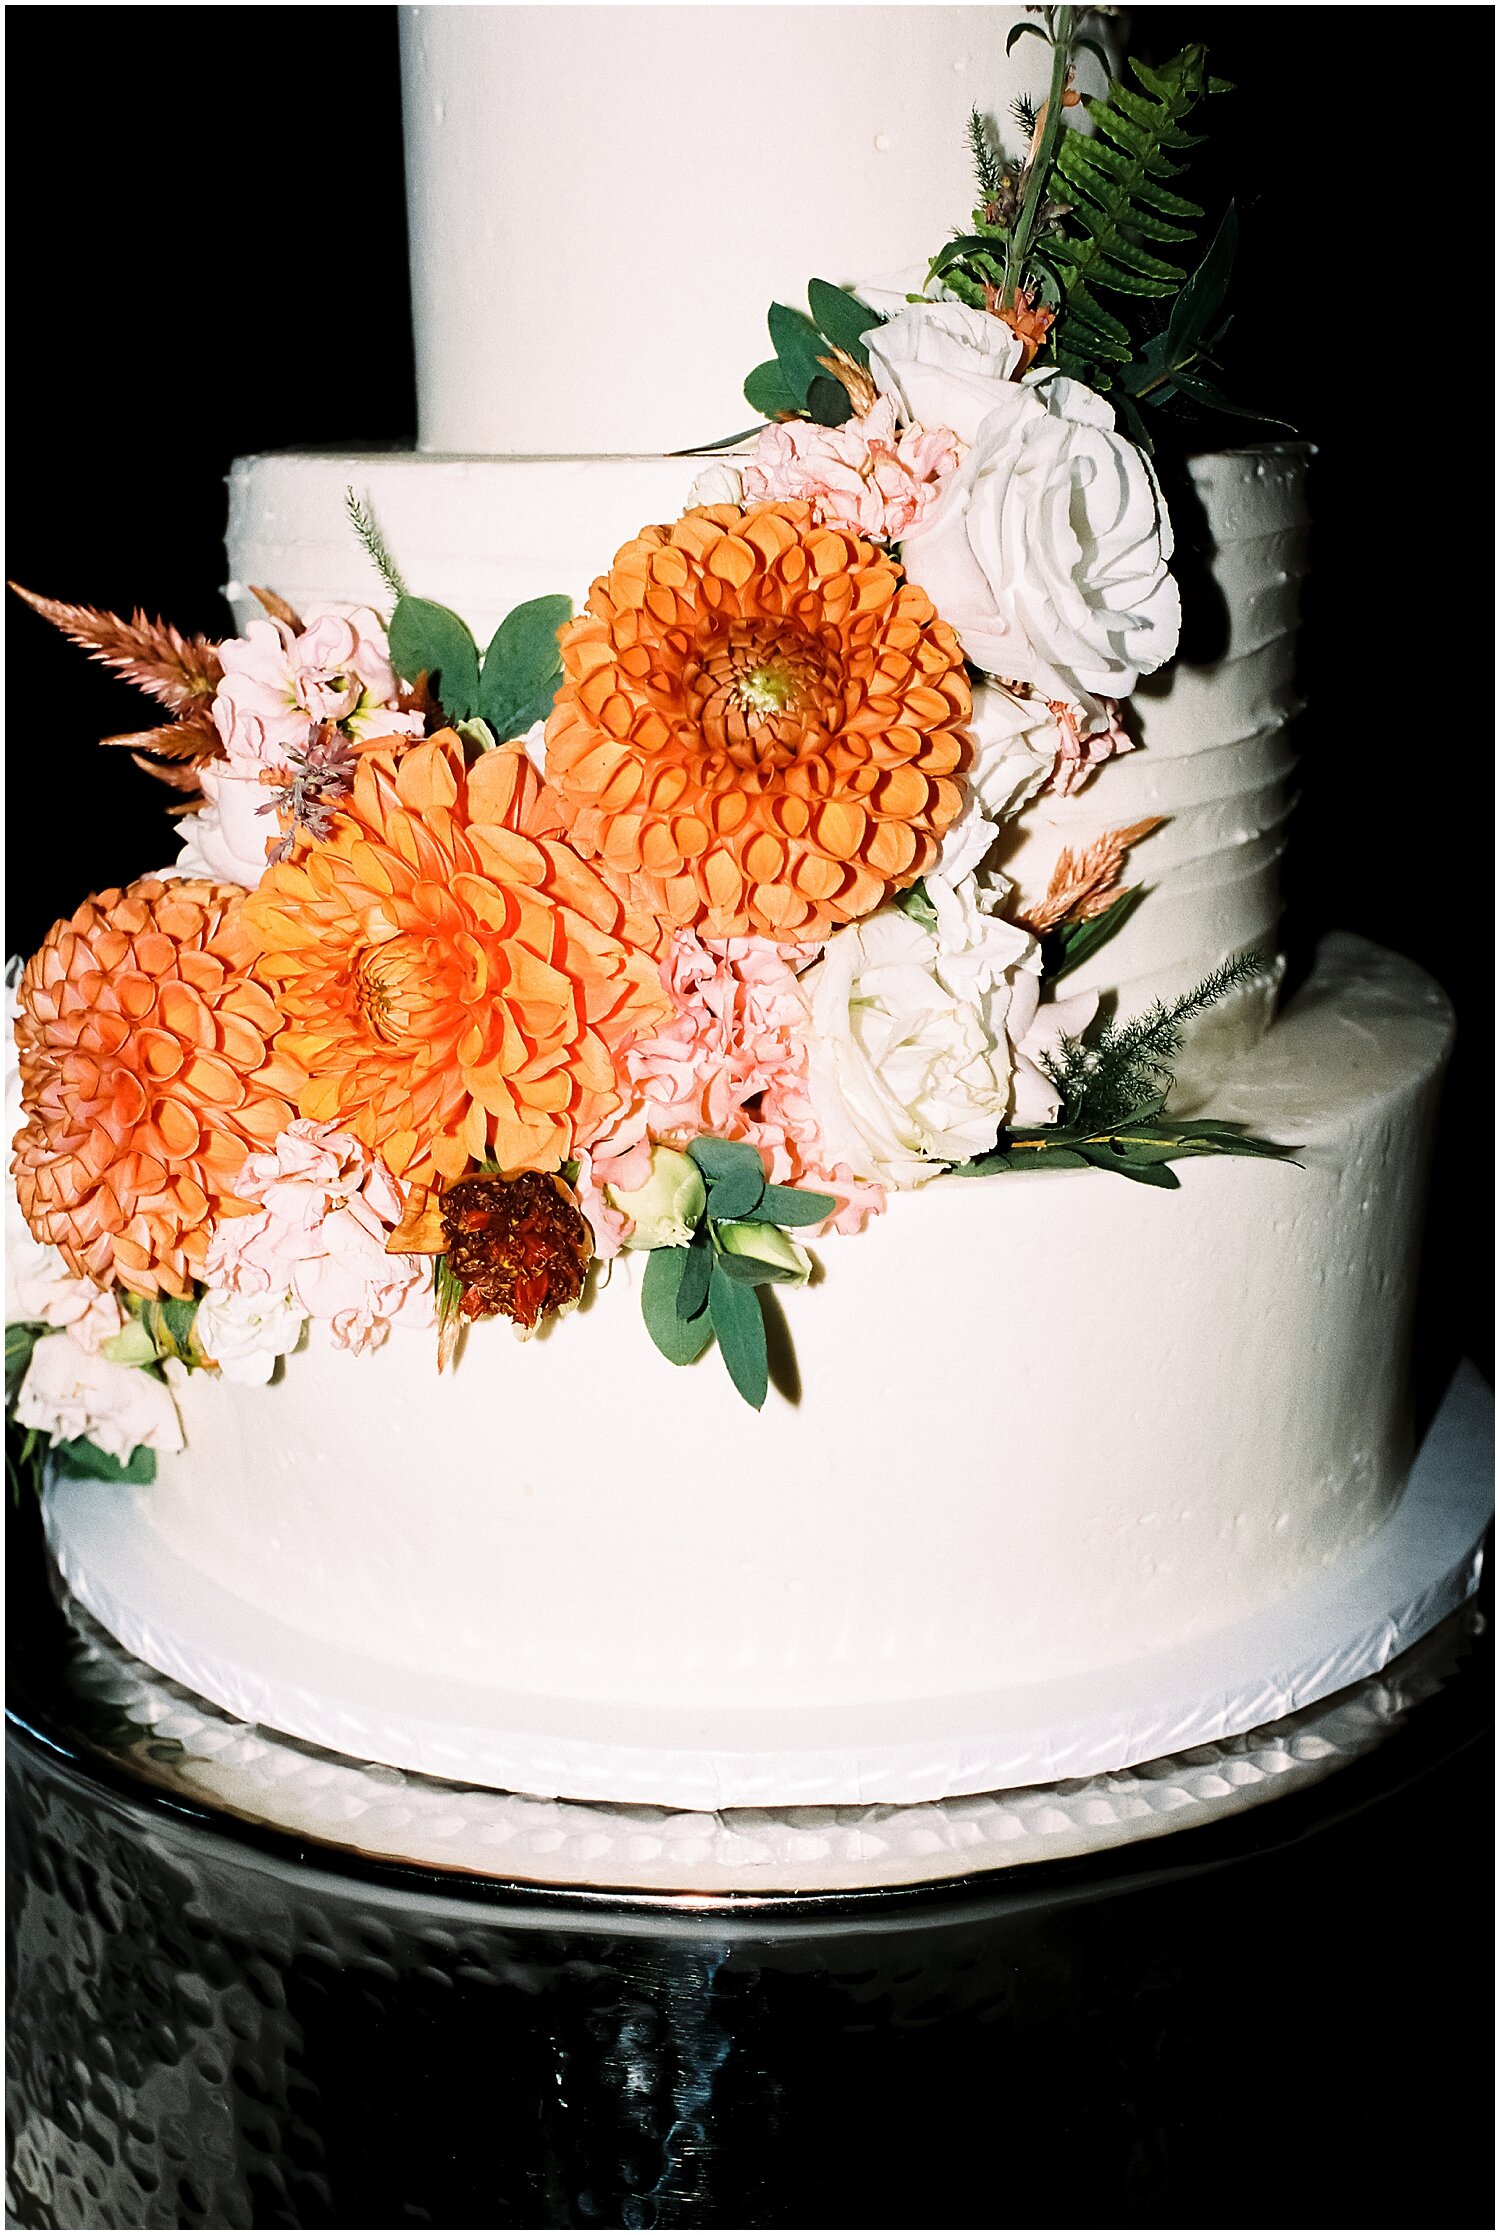  white wedding cake with floral decor 